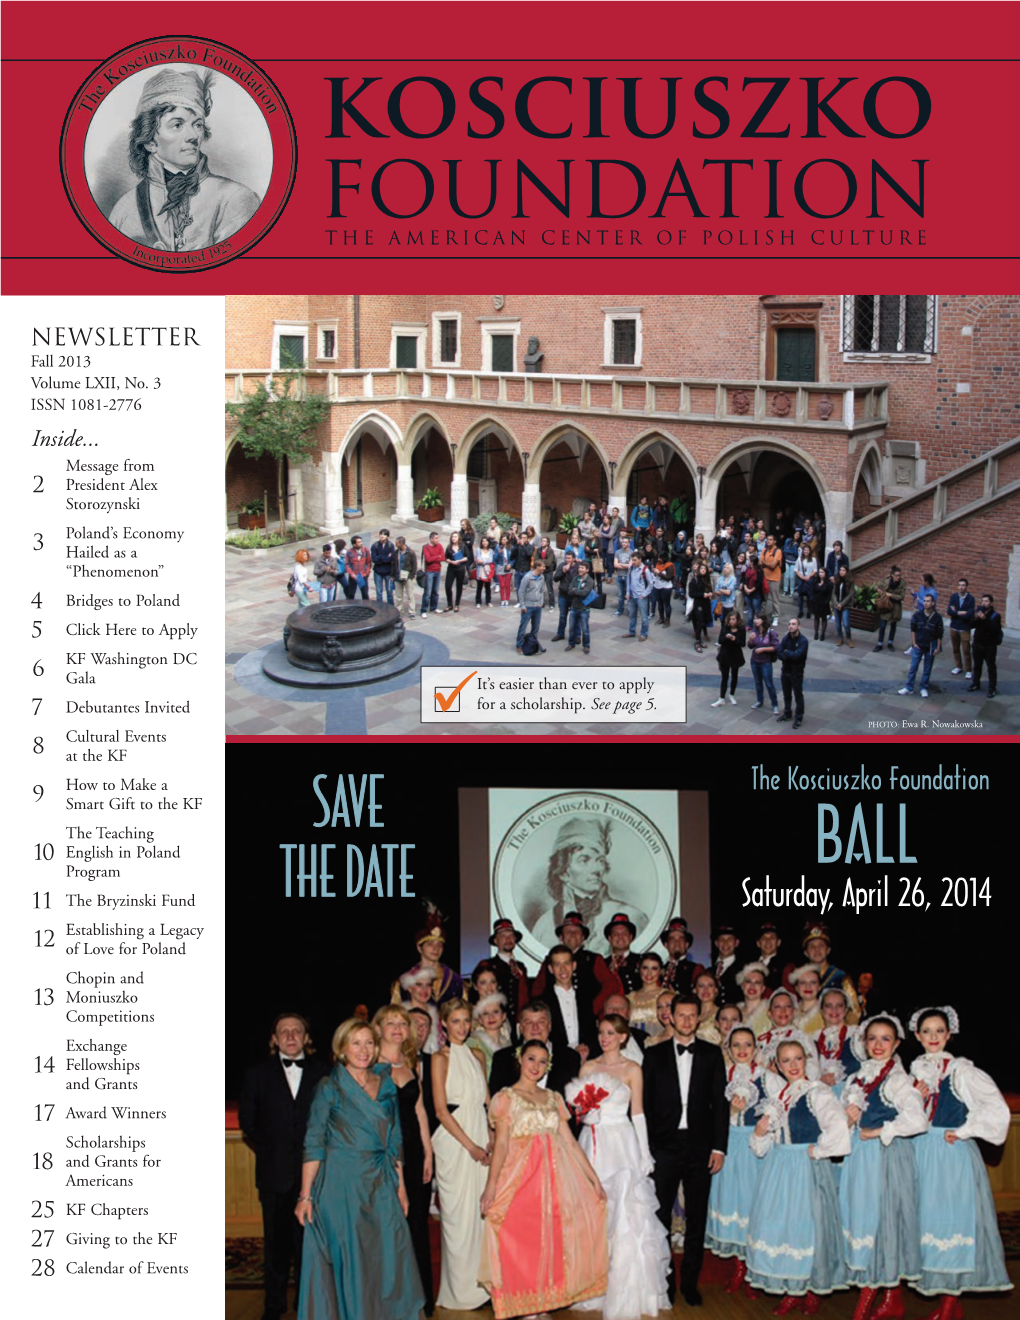 NEWSLETTER Fall 2013 Volume LXII, No